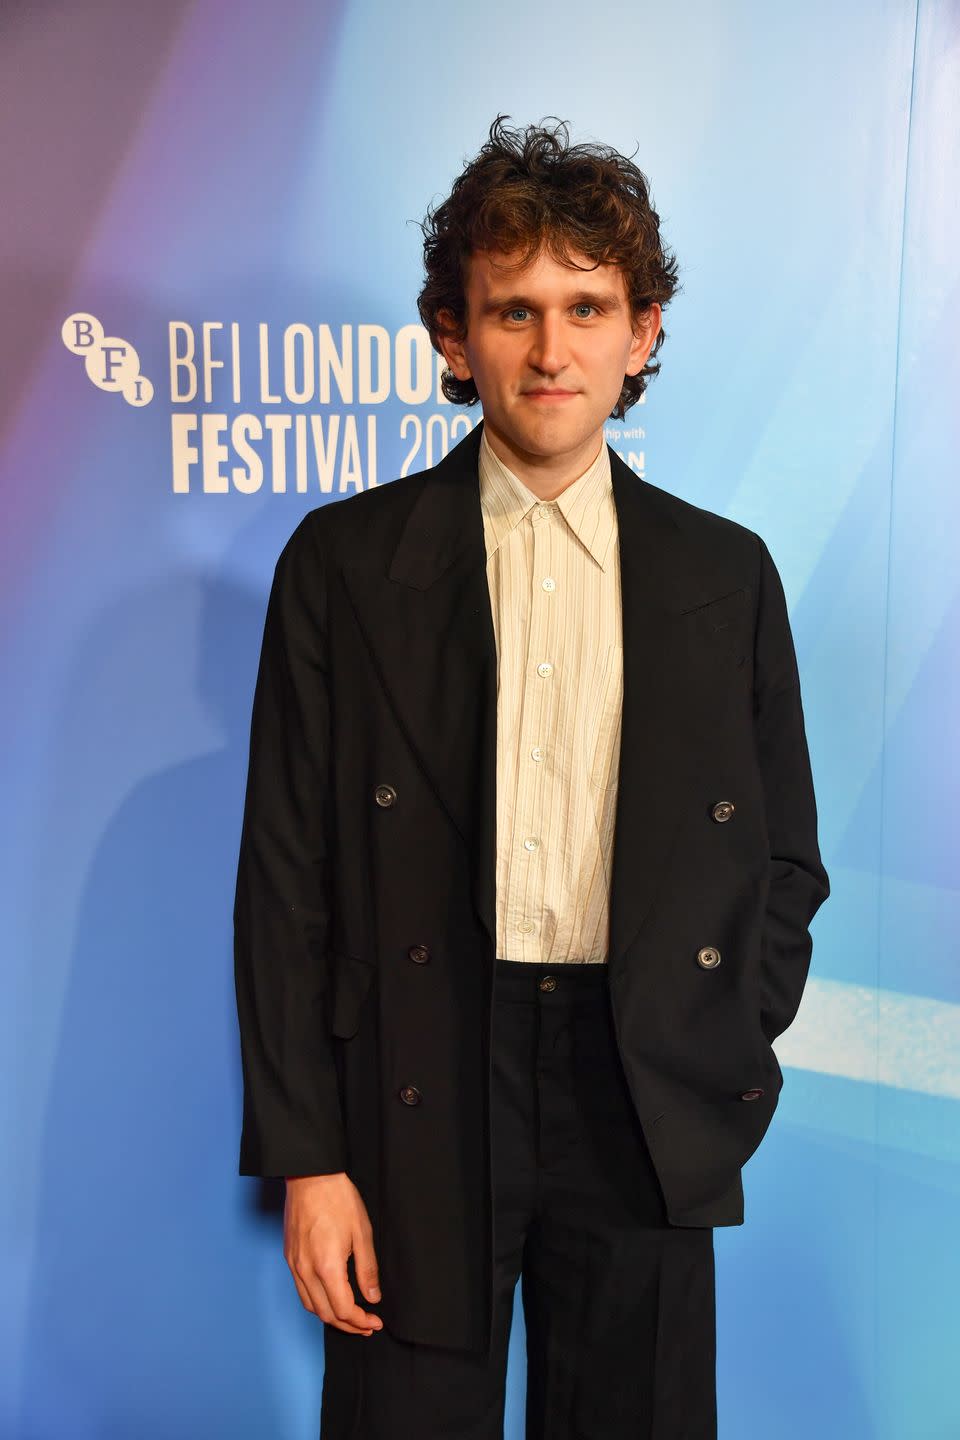 harry melling at the bfi london festival